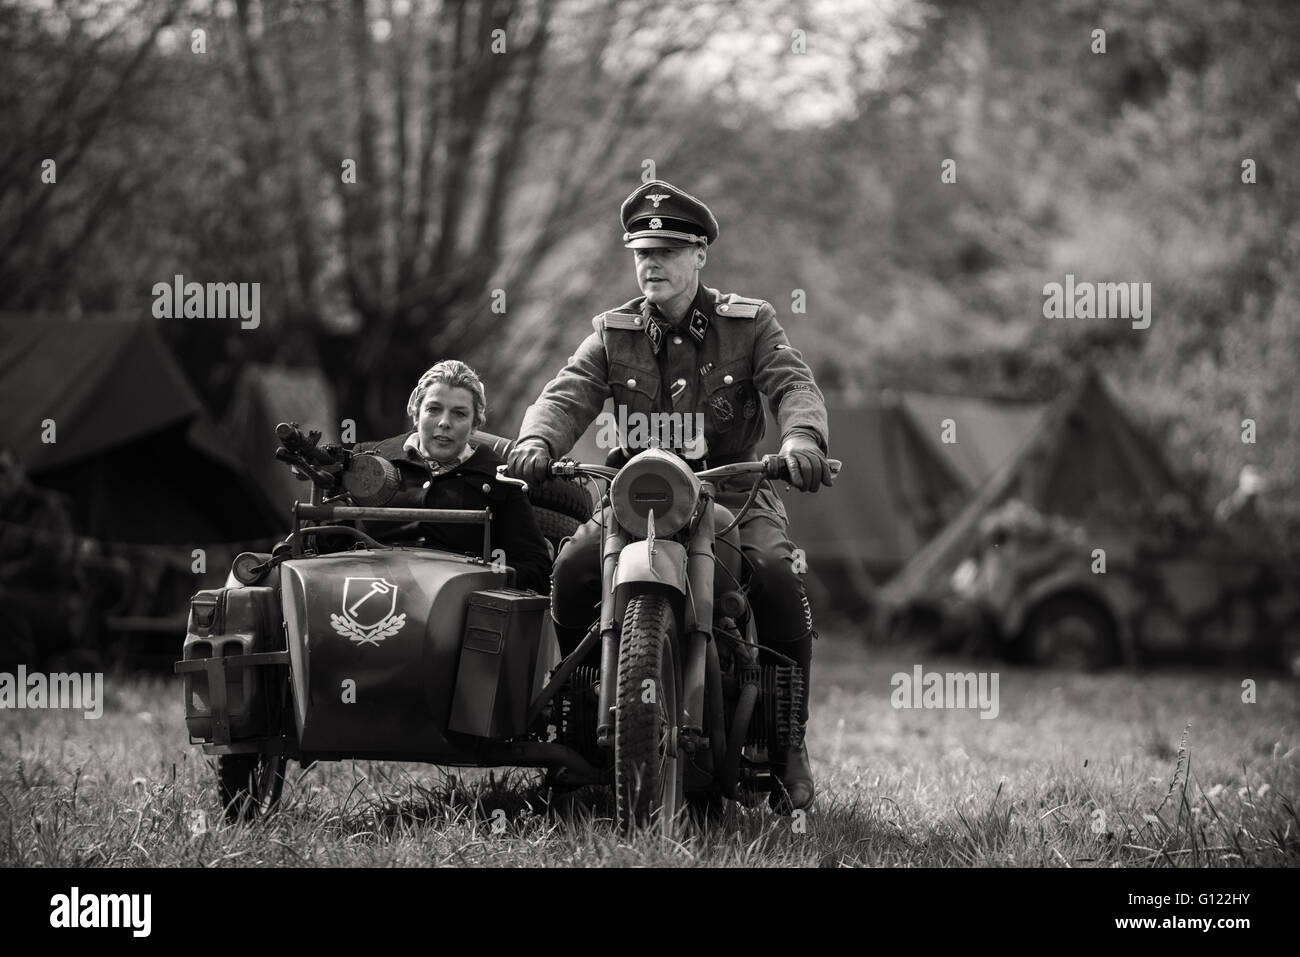 German SS officer riding a motorcycle and side car - Fortress wales mulit-period re-enactment event at Caldecot Castle Stock Photo